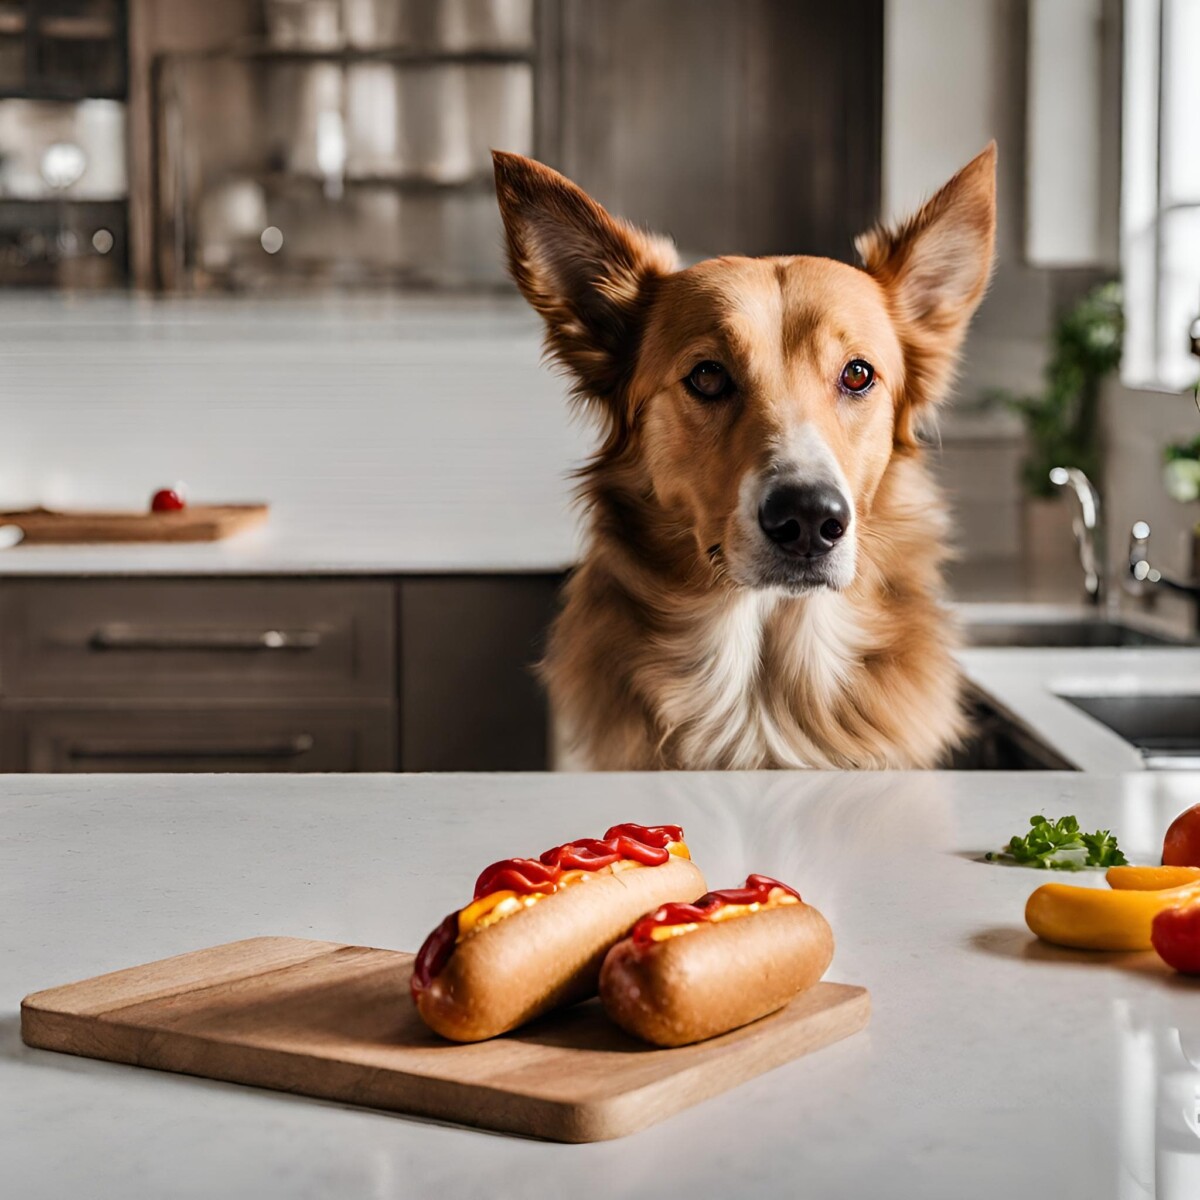 can dogs eat hot dogs